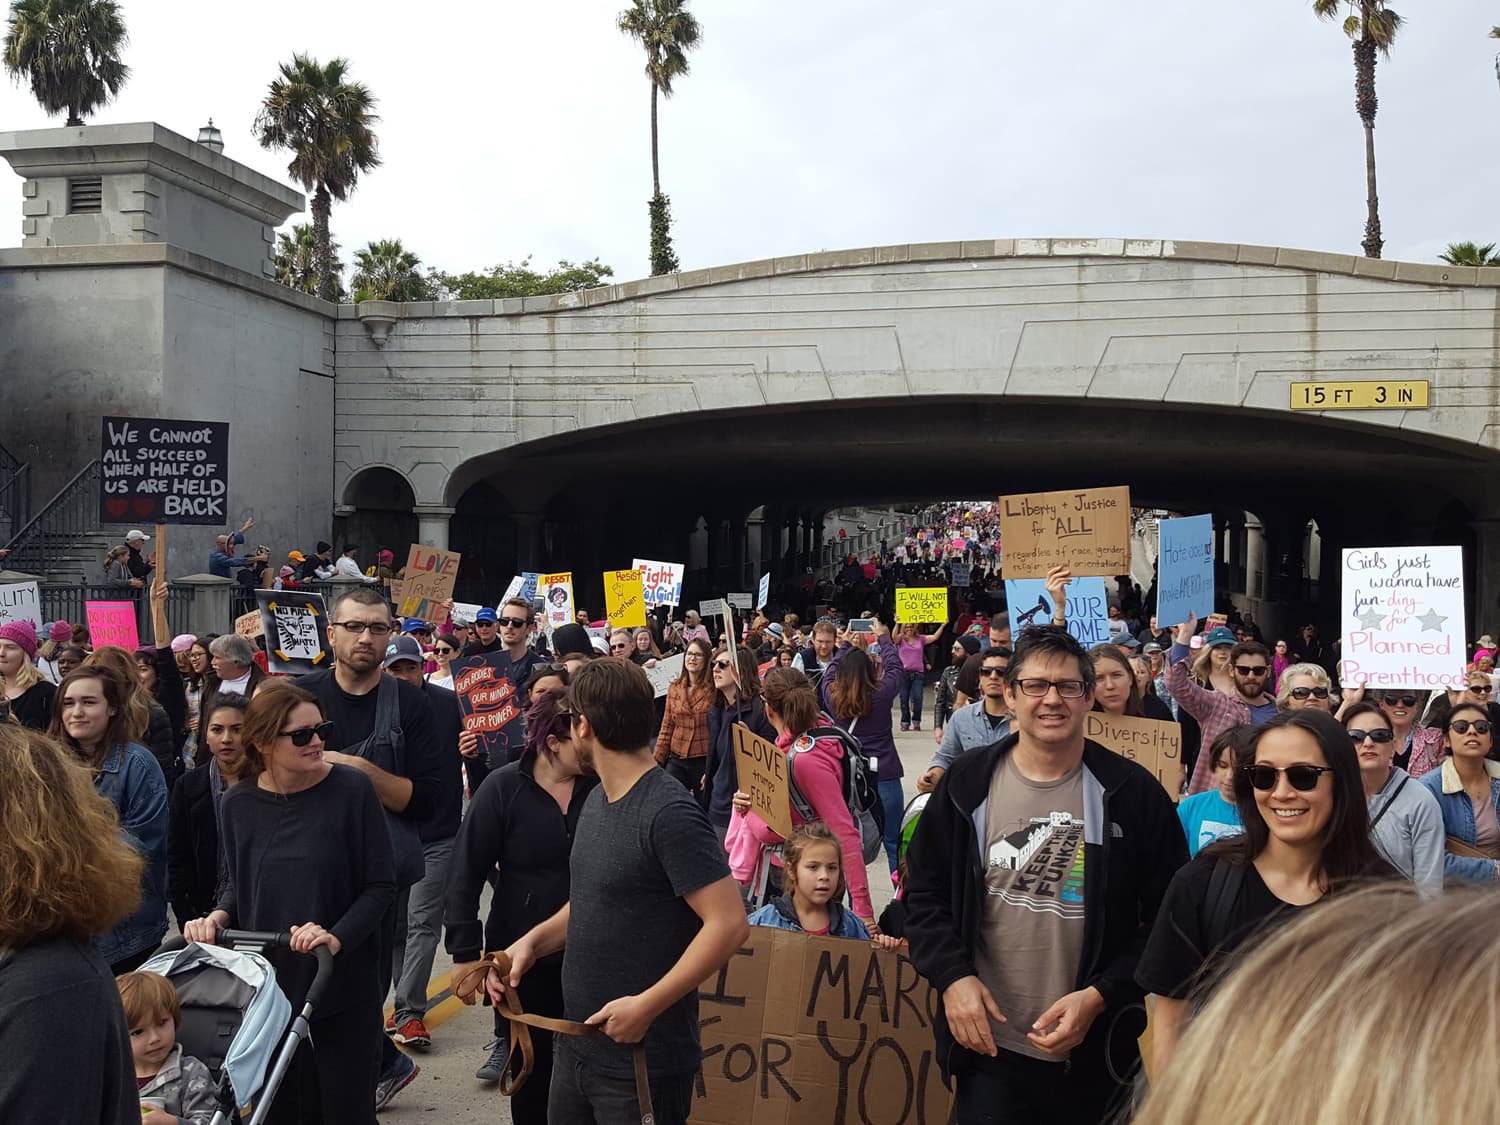 A view of the Santa Barbara, CA Women's March. (Courtesy Christy VHS/@cvhgsb)